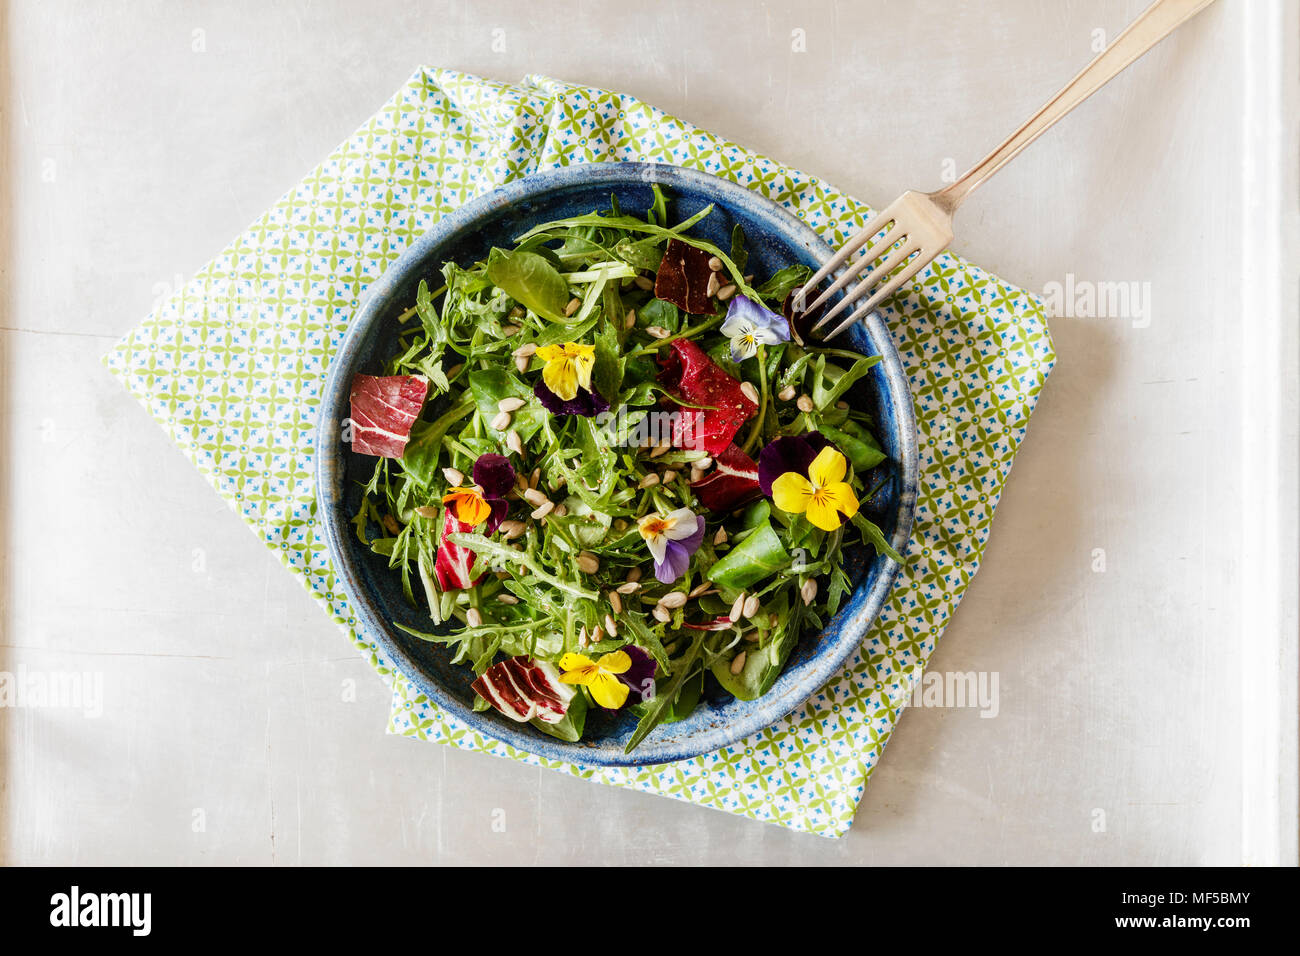 Bowl with salad, lamb's lettuce, rucola, radicchio and edible flowers Stock Photo